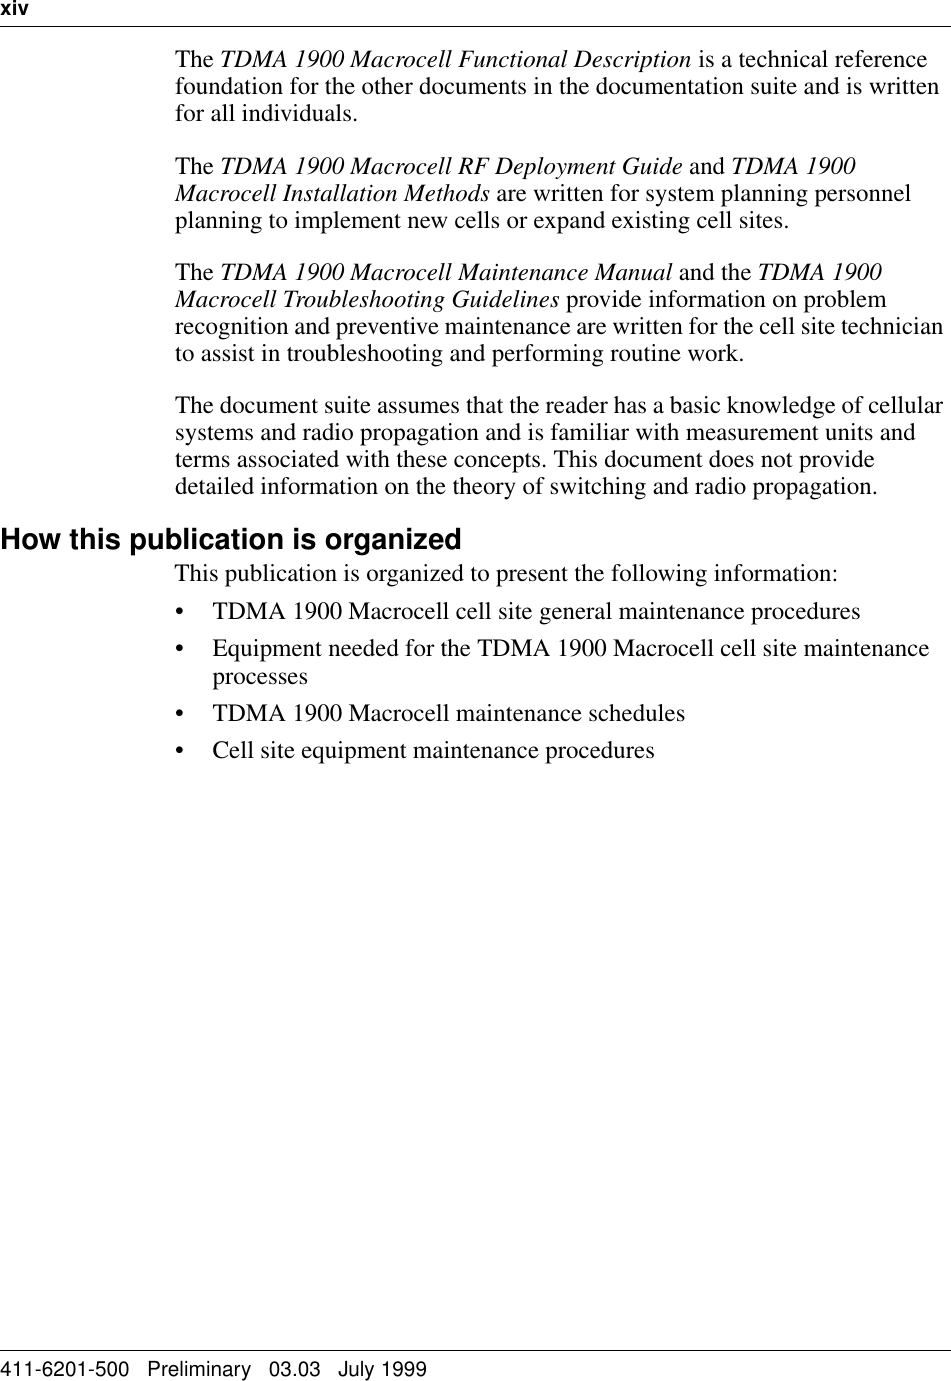 xiv   411-6201-500   Preliminary   03.03   July 1999The TDMA 1900 Macrocell Functional Description is a technical reference foundation for the other documents in the documentation suite and is written for all individuals.The TDMA 1900 Macrocell RF Deployment Guide and TDMA 1900 Macrocell Installation Methods are written for system planning personnel planning to implement new cells or expand existing cell sites. The TDMA 1900 Macrocell Maintenance Manual and the TDMA 1900 Macrocell Troubleshooting Guidelines provide information on problem recognition and preventive maintenance are written for the cell site technician to assist in troubleshooting and performing routine work.The document suite assumes that the reader has a basic knowledge of cellular systems and radio propagation and is familiar with measurement units and terms associated with these concepts. This document does not provide detailed information on the theory of switching and radio propagation.How this publication is organizedThis publication is organized to present the following information:• TDMA 1900 Macrocell cell site general maintenance procedures• Equipment needed for the TDMA 1900 Macrocell cell site maintenance processes• TDMA 1900 Macrocell maintenance schedules• Cell site equipment maintenance procedures1